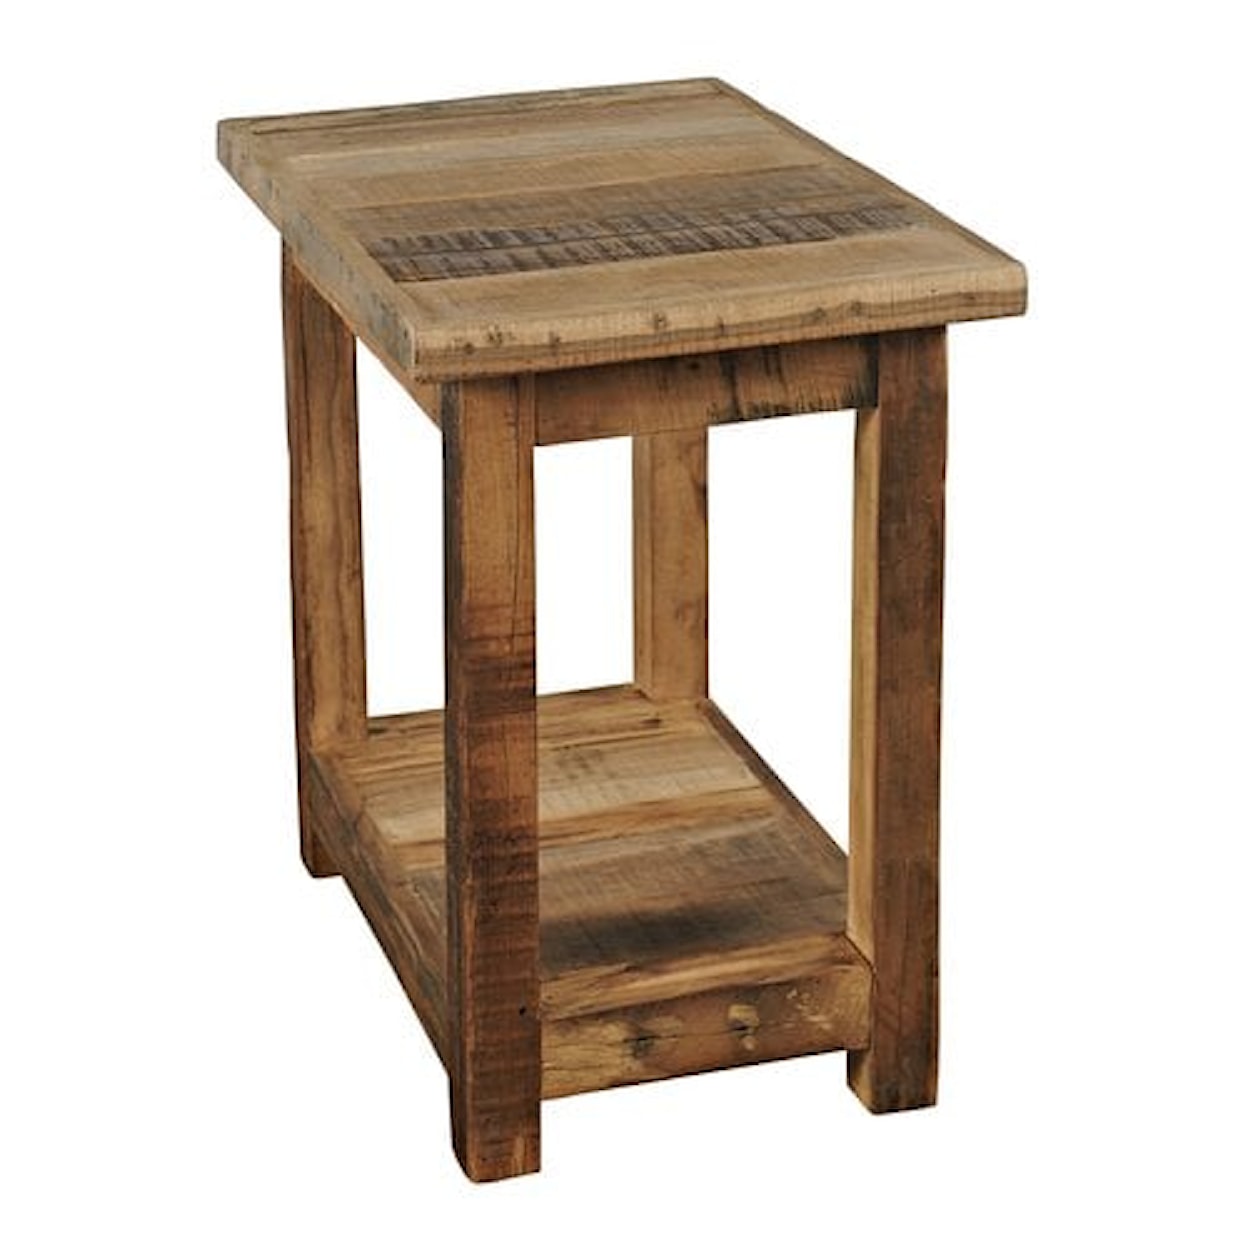 Jofran Reclamation Chairside Table